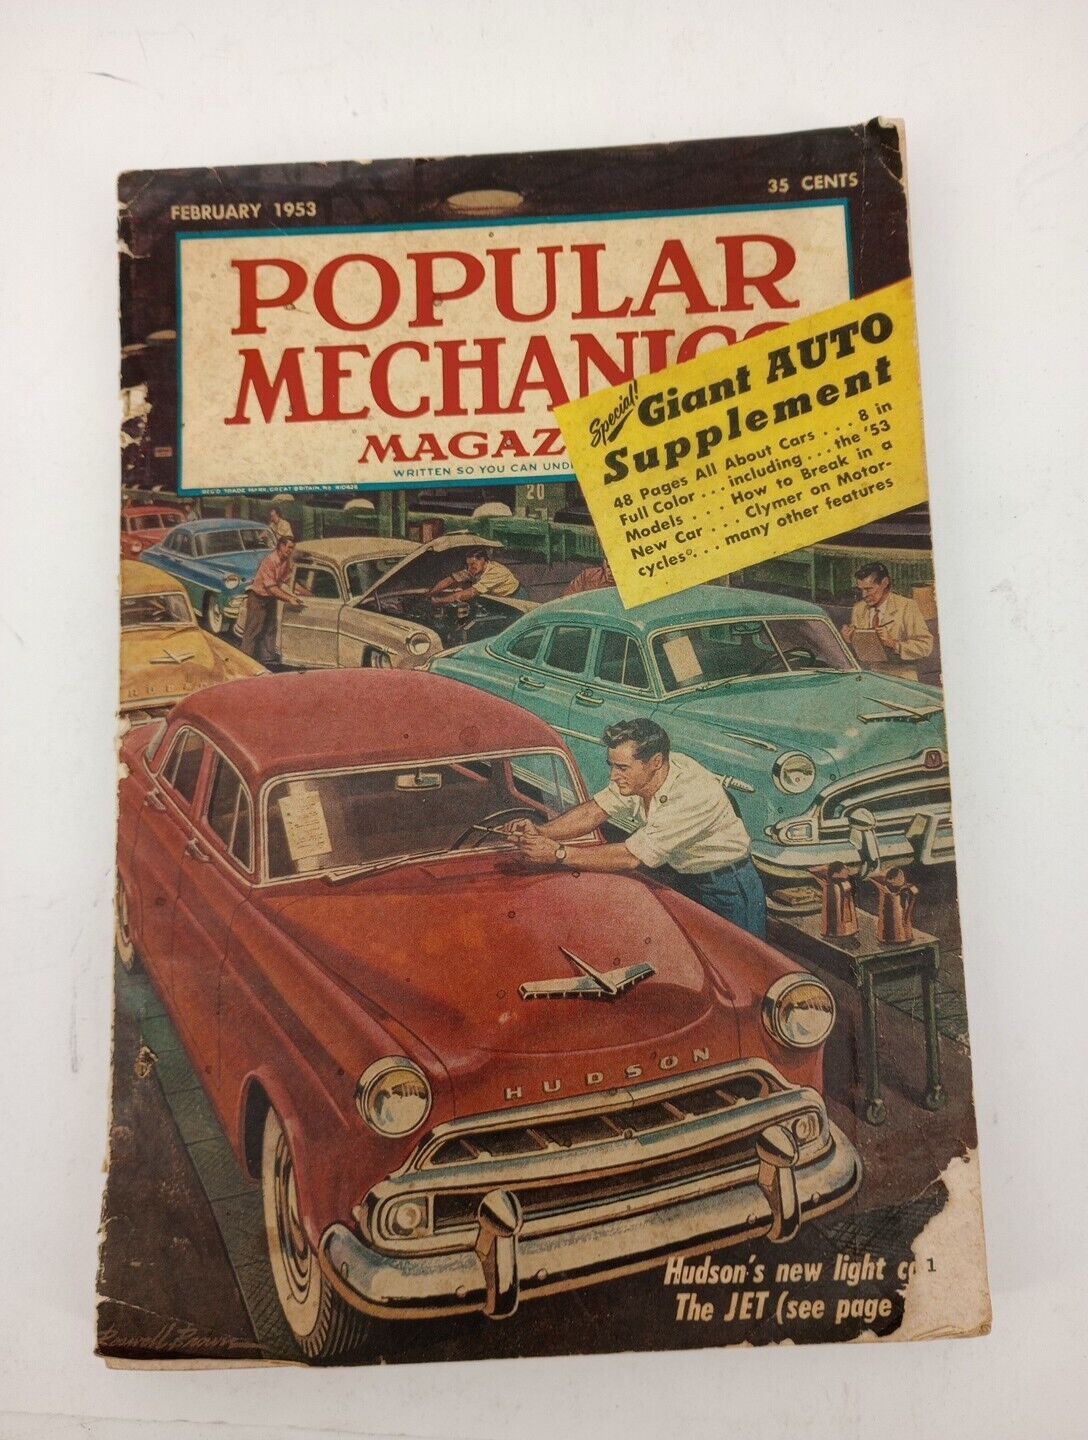  Popular Mechanics February 1953 Magazine  Special Giant Auto Supplement Section